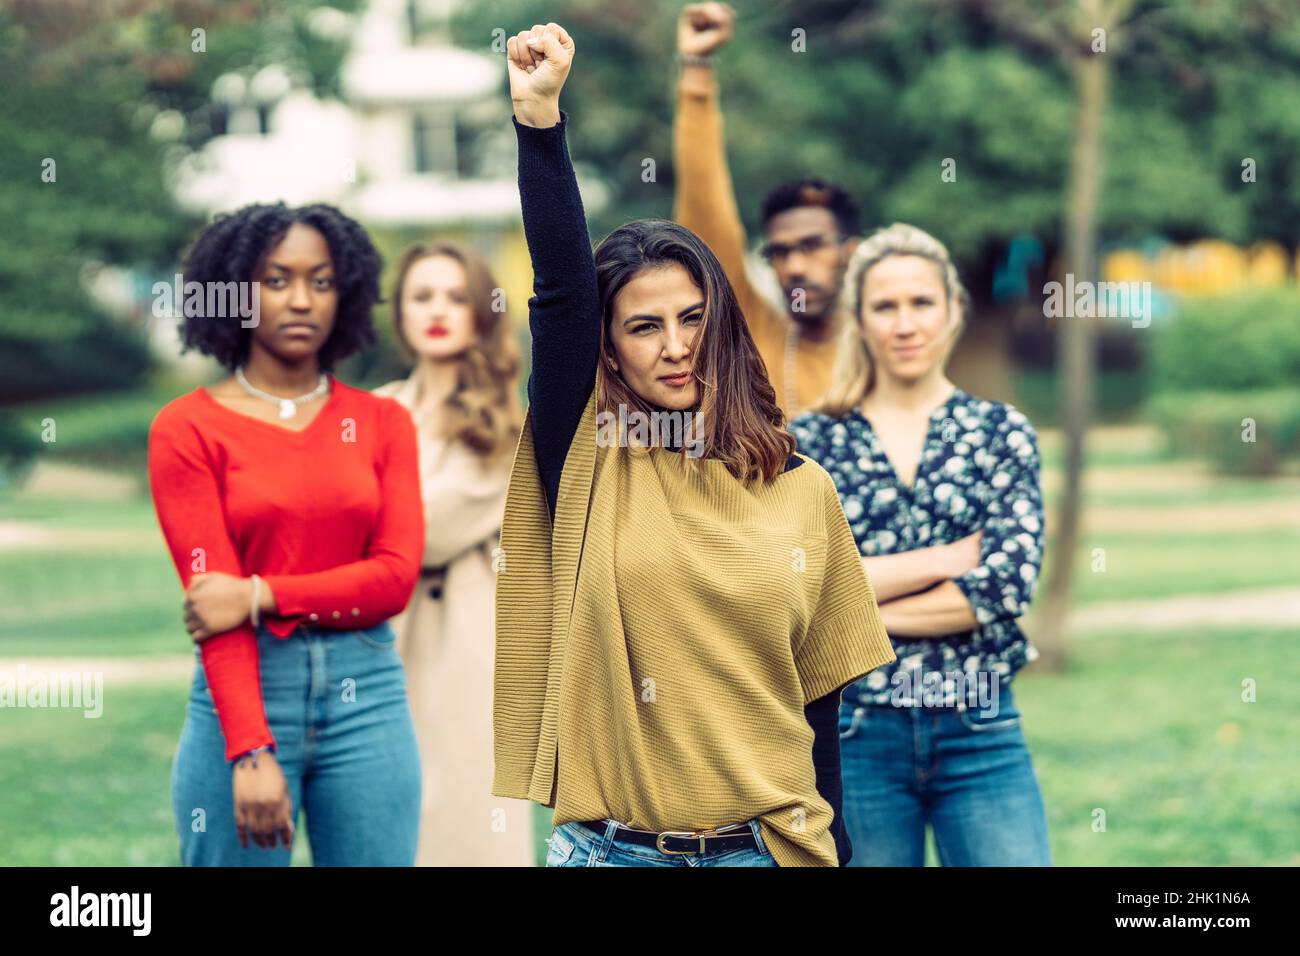 woman with latin features raises her fist protesting inequality between men and women with 4 people behind her  Stock Photo